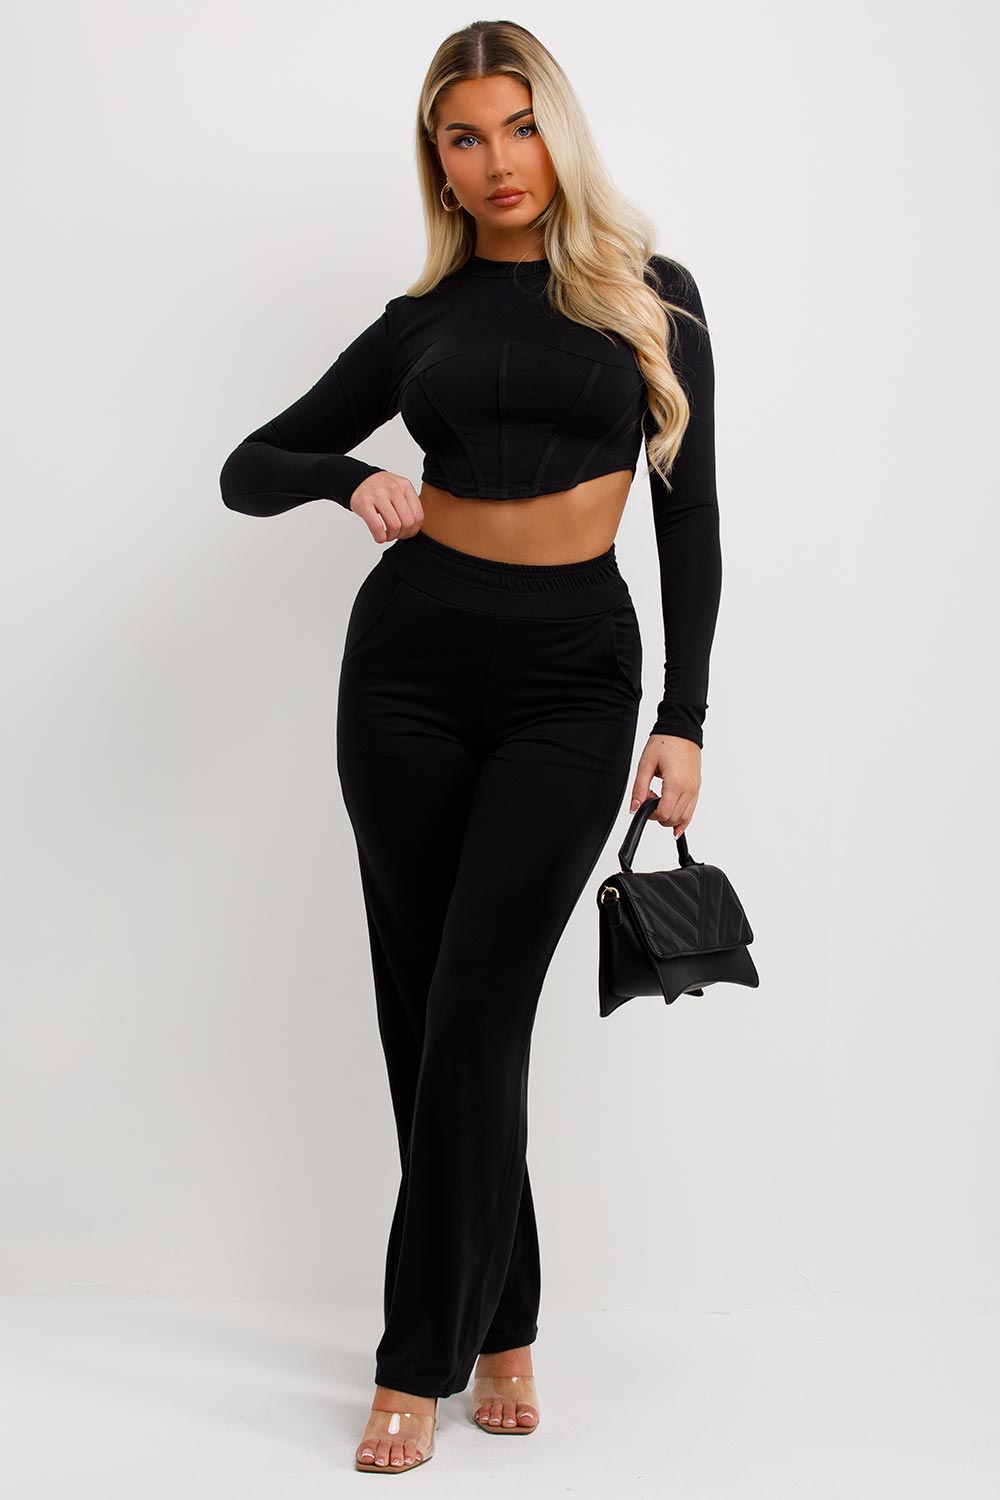 Women's Corset Top And Trousers Set Black Going Outfit – Styledup